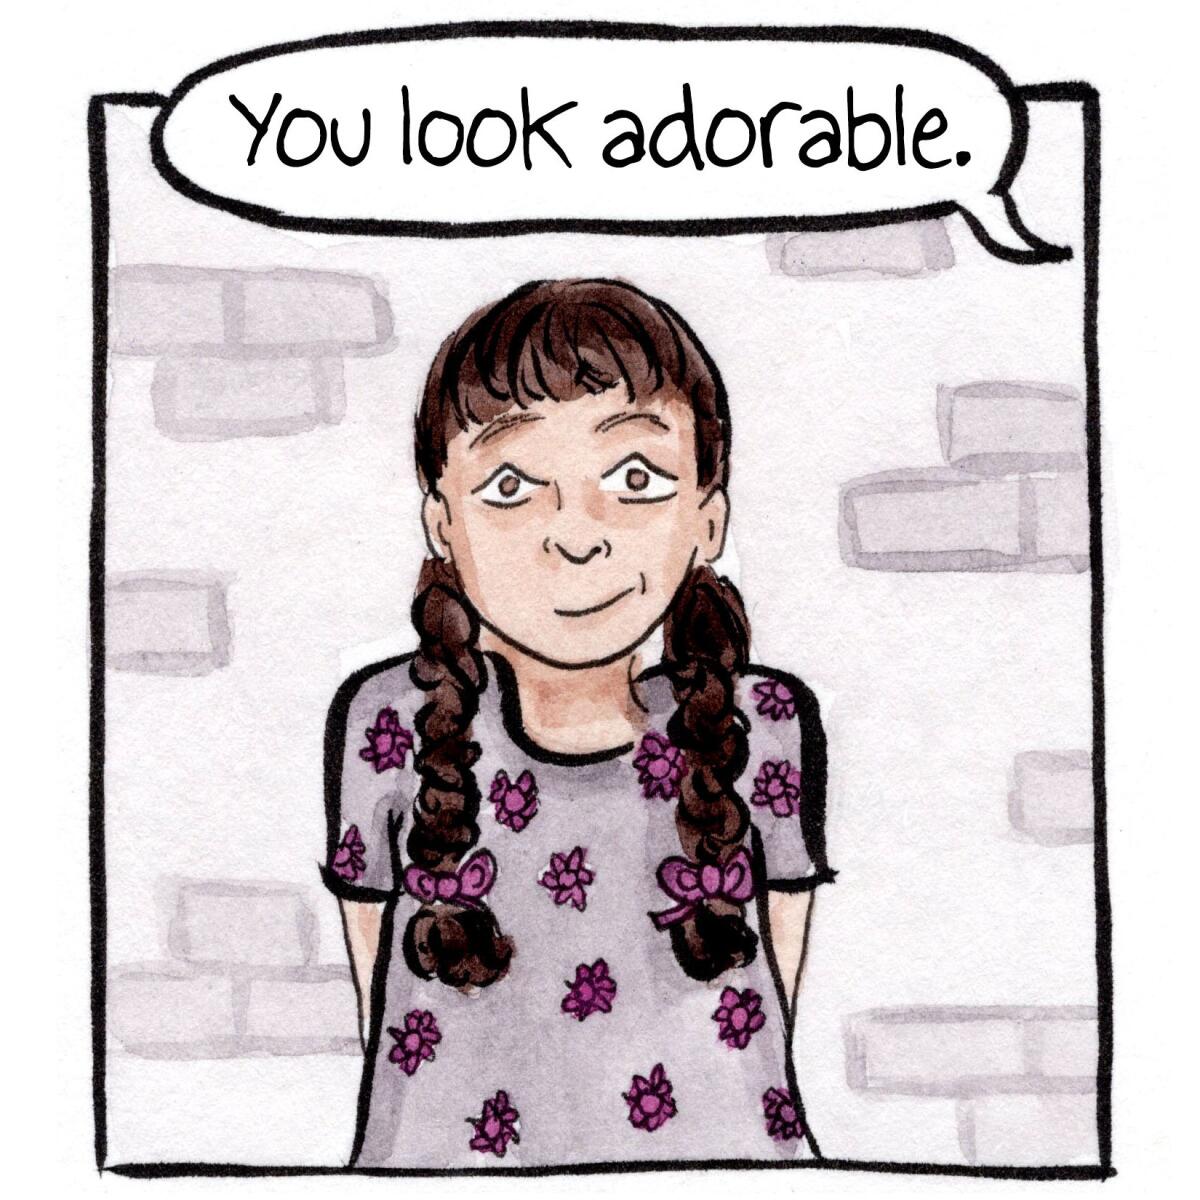 Someone says, "You look adorable!" to a child wearing a flower-print T-shirt and long braids.